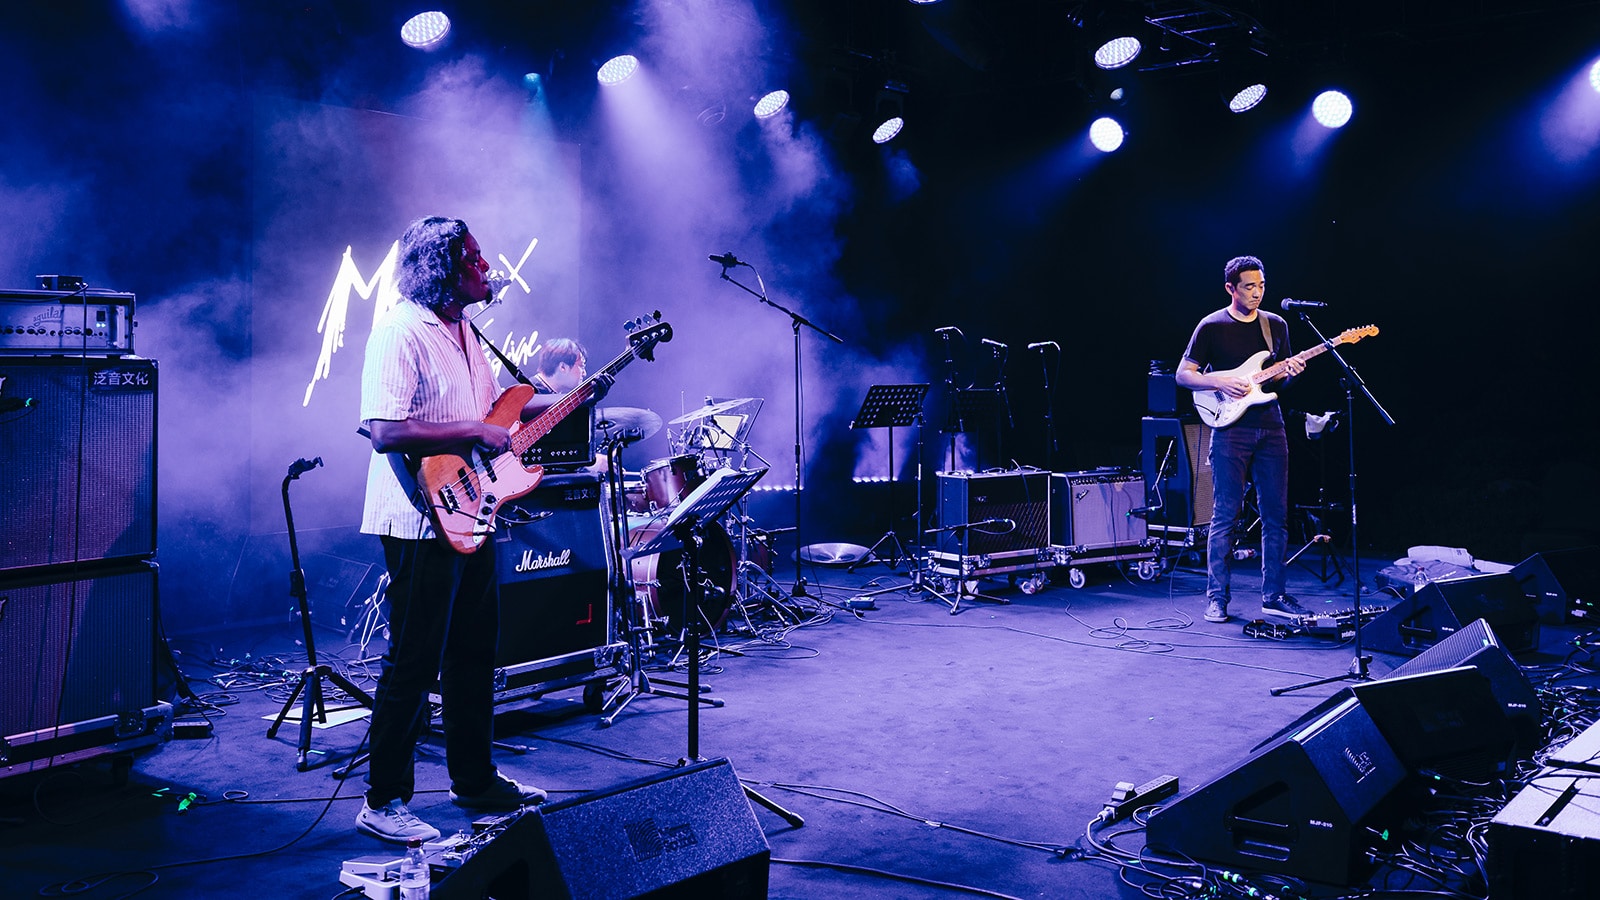 Meyer Sound Transplants a Long Sonic Tradition to Montreux Jazz Festival China